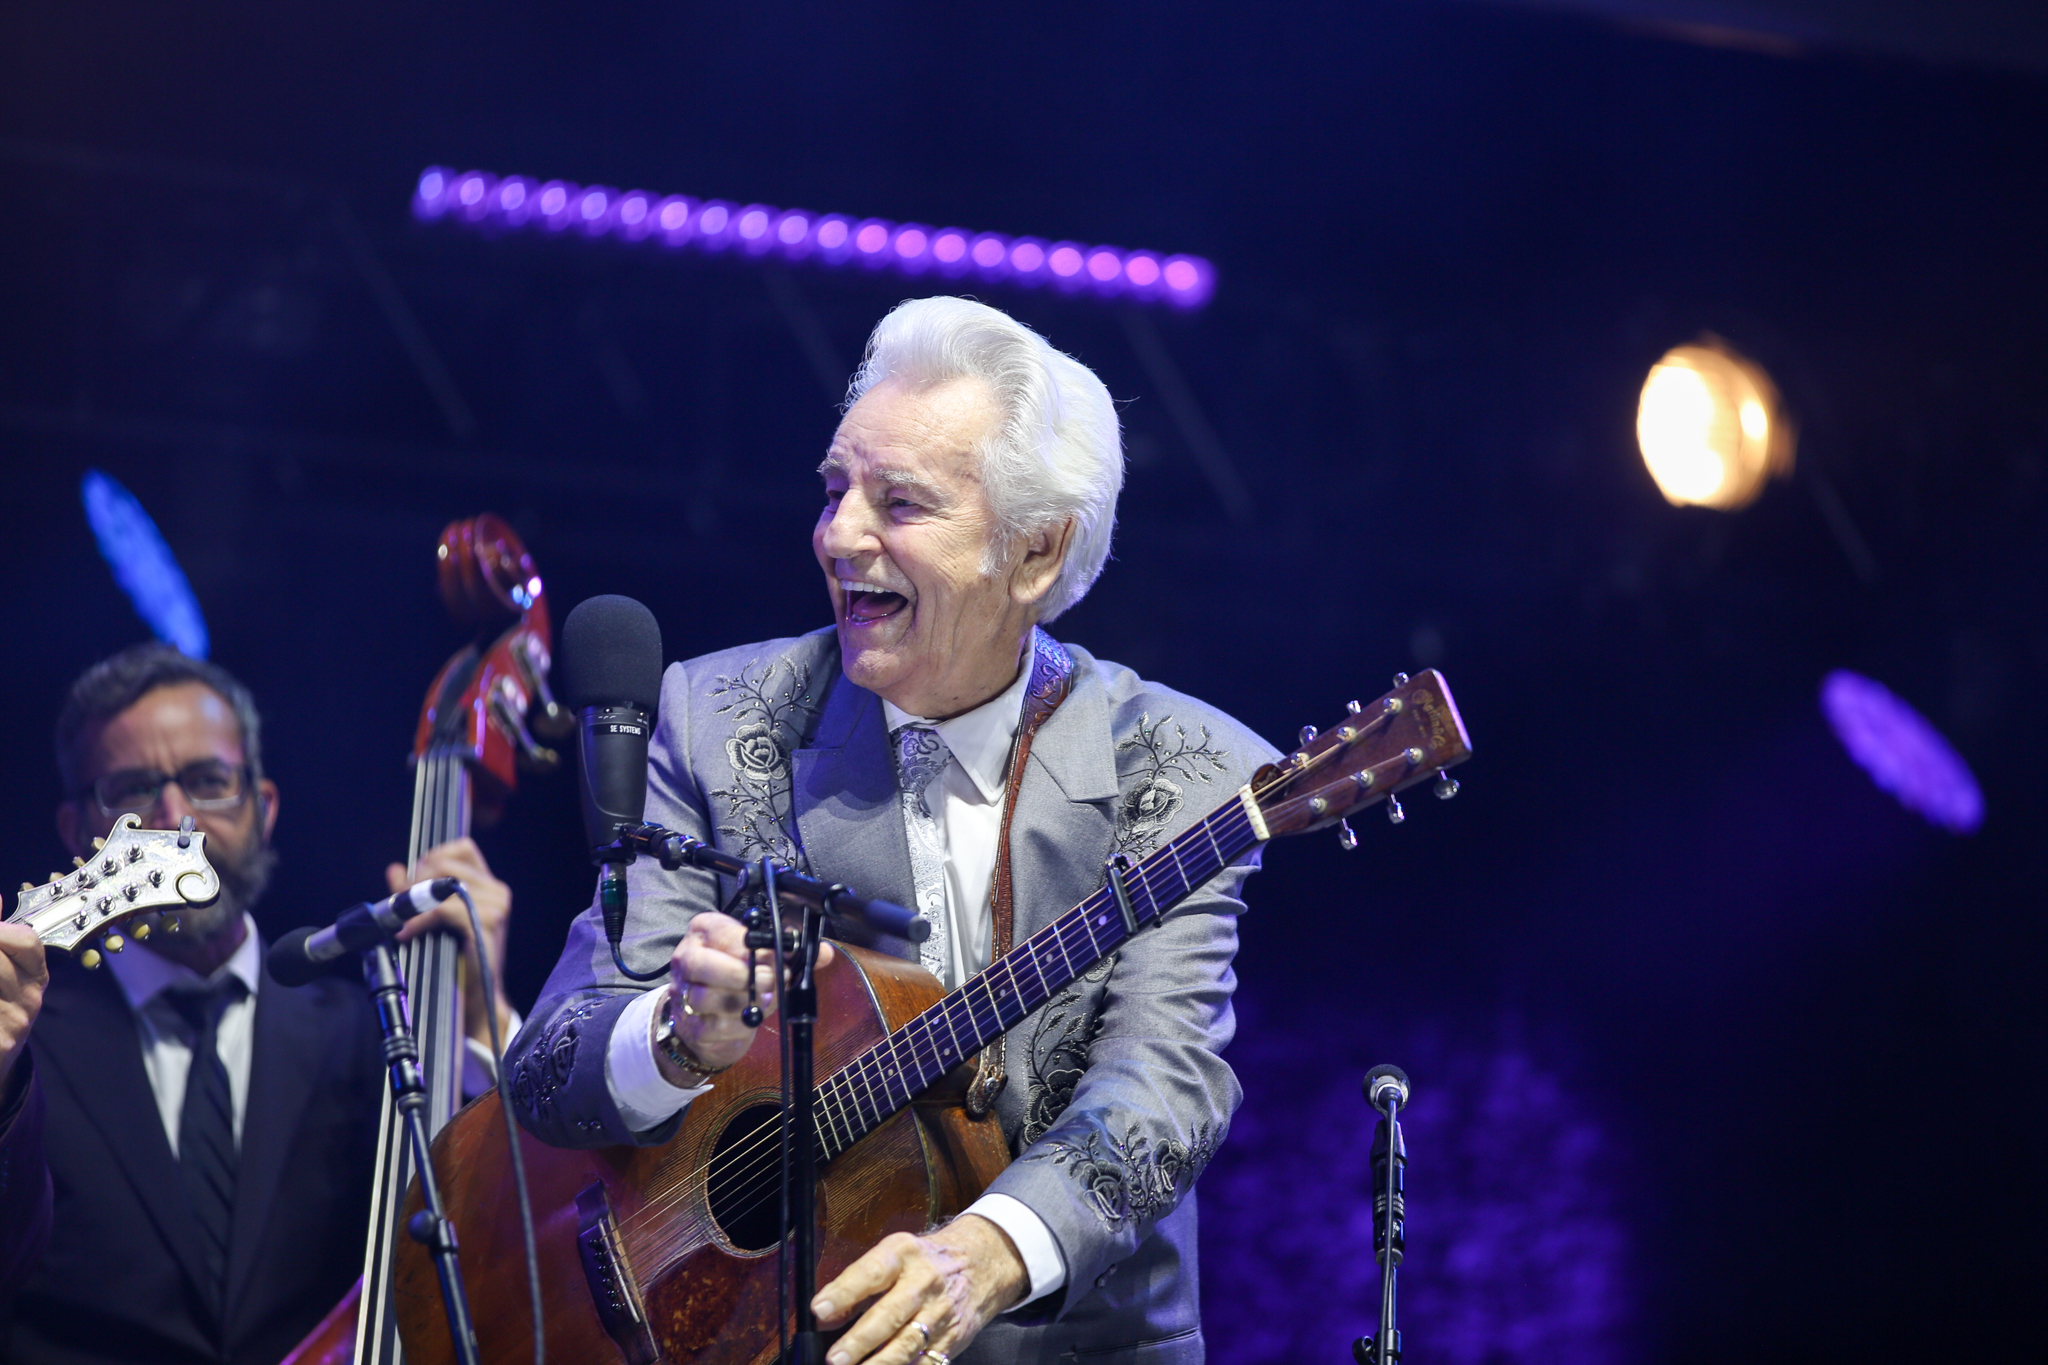 The Del McCoury Band performs at the IBMA's in Raleigh NorthcCarolina.    Photos by Light Shifter Studios